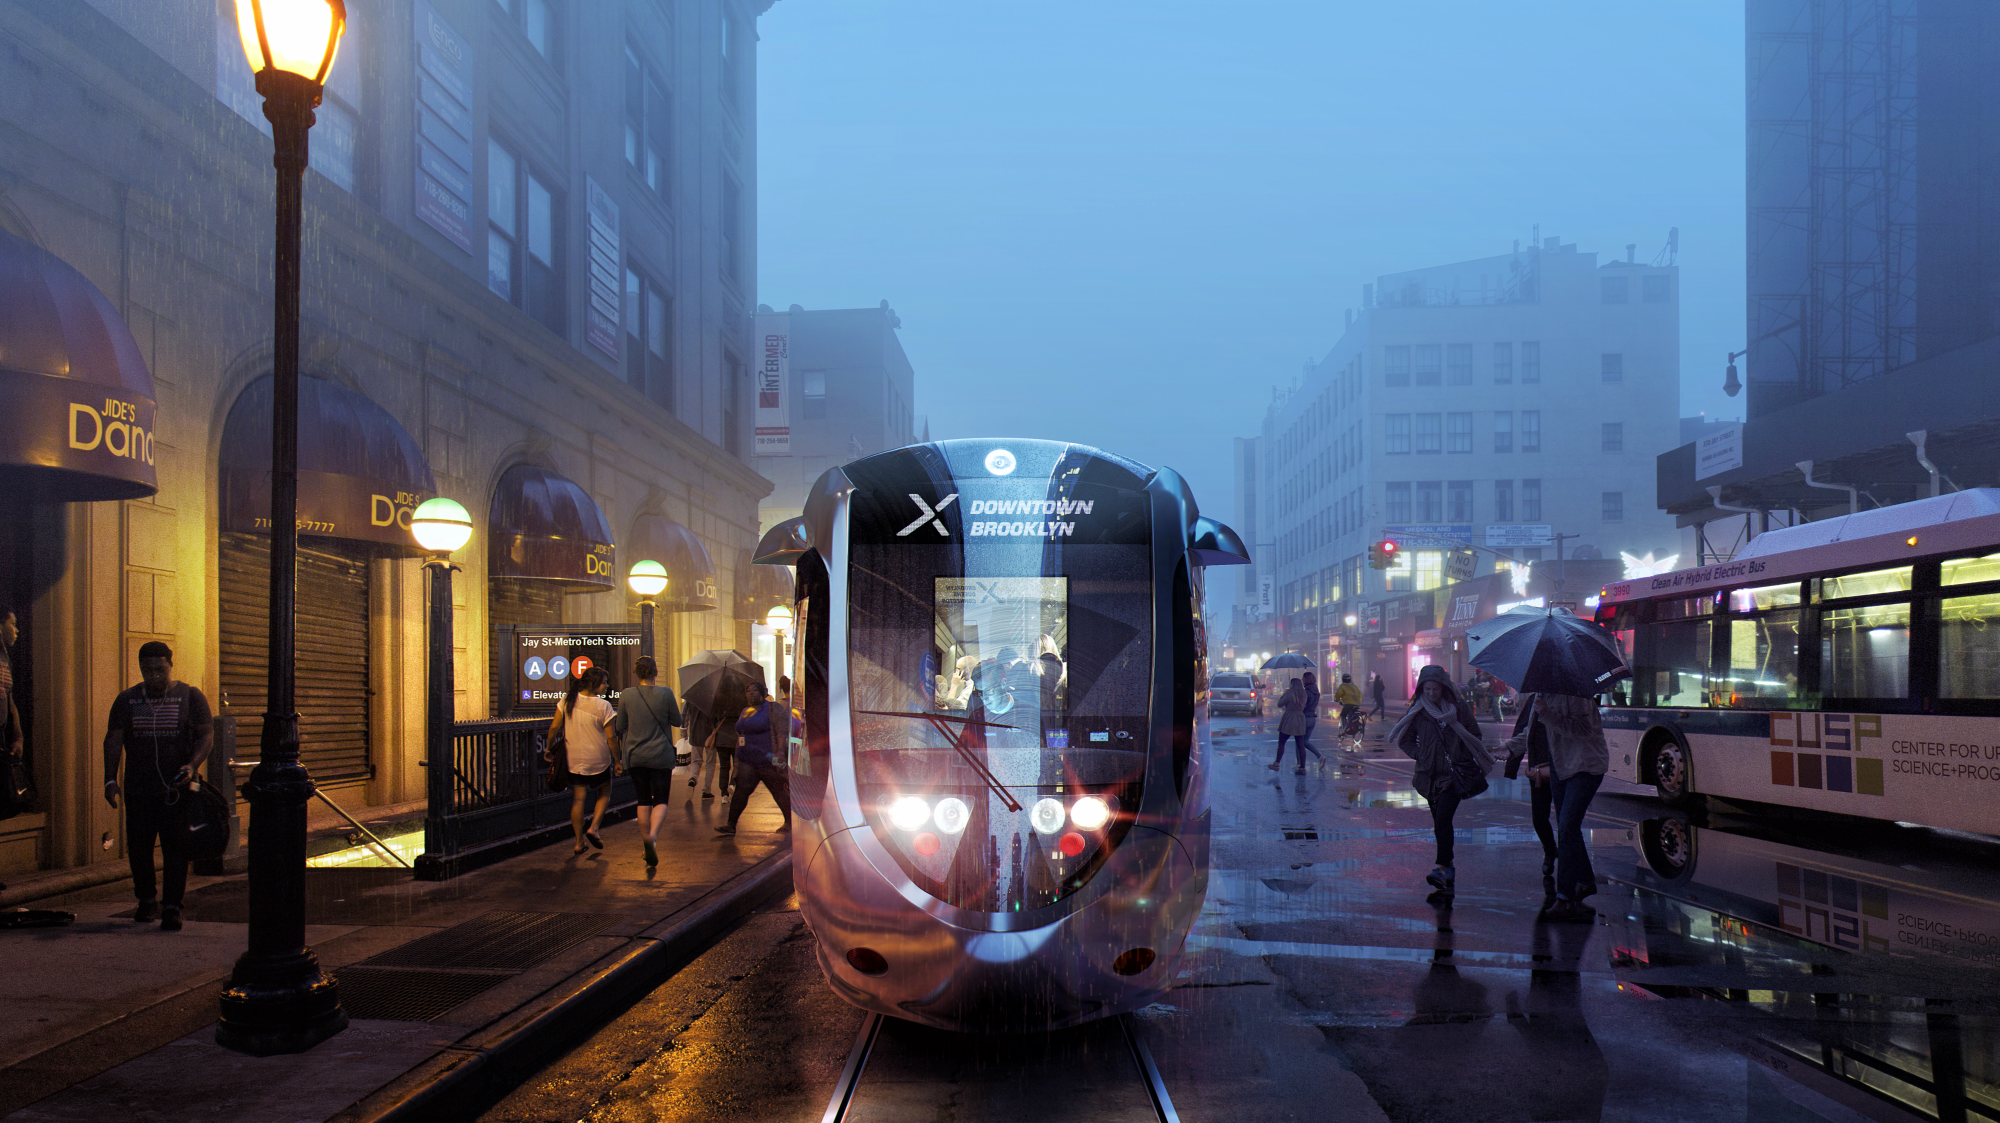 The streetcar could run along the existing roadway (Friends of the BQX)